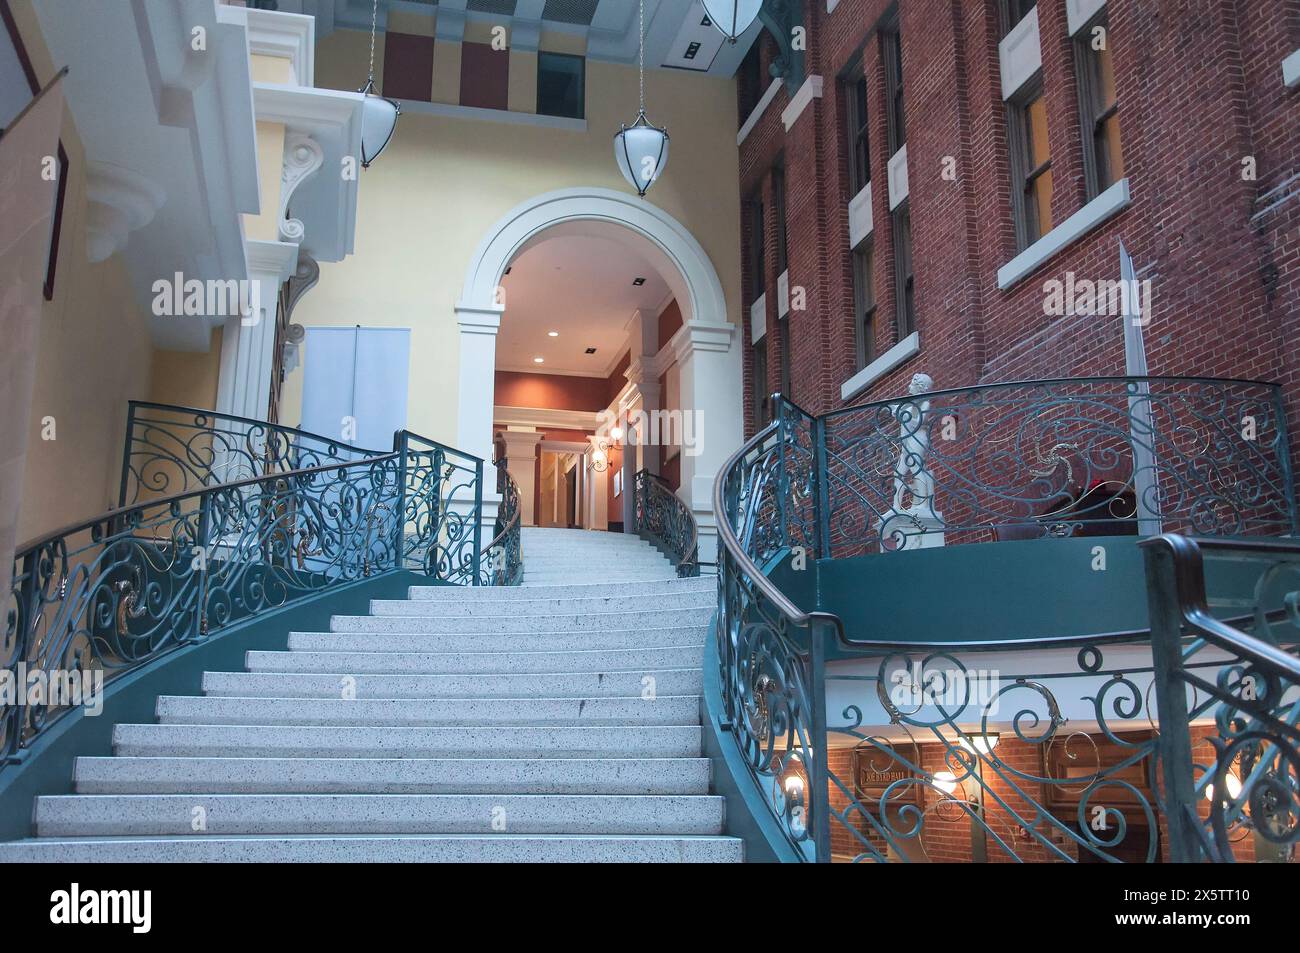 The interior area of a historic building in the mount vernon district of Baltimore maryland. Stock Photo